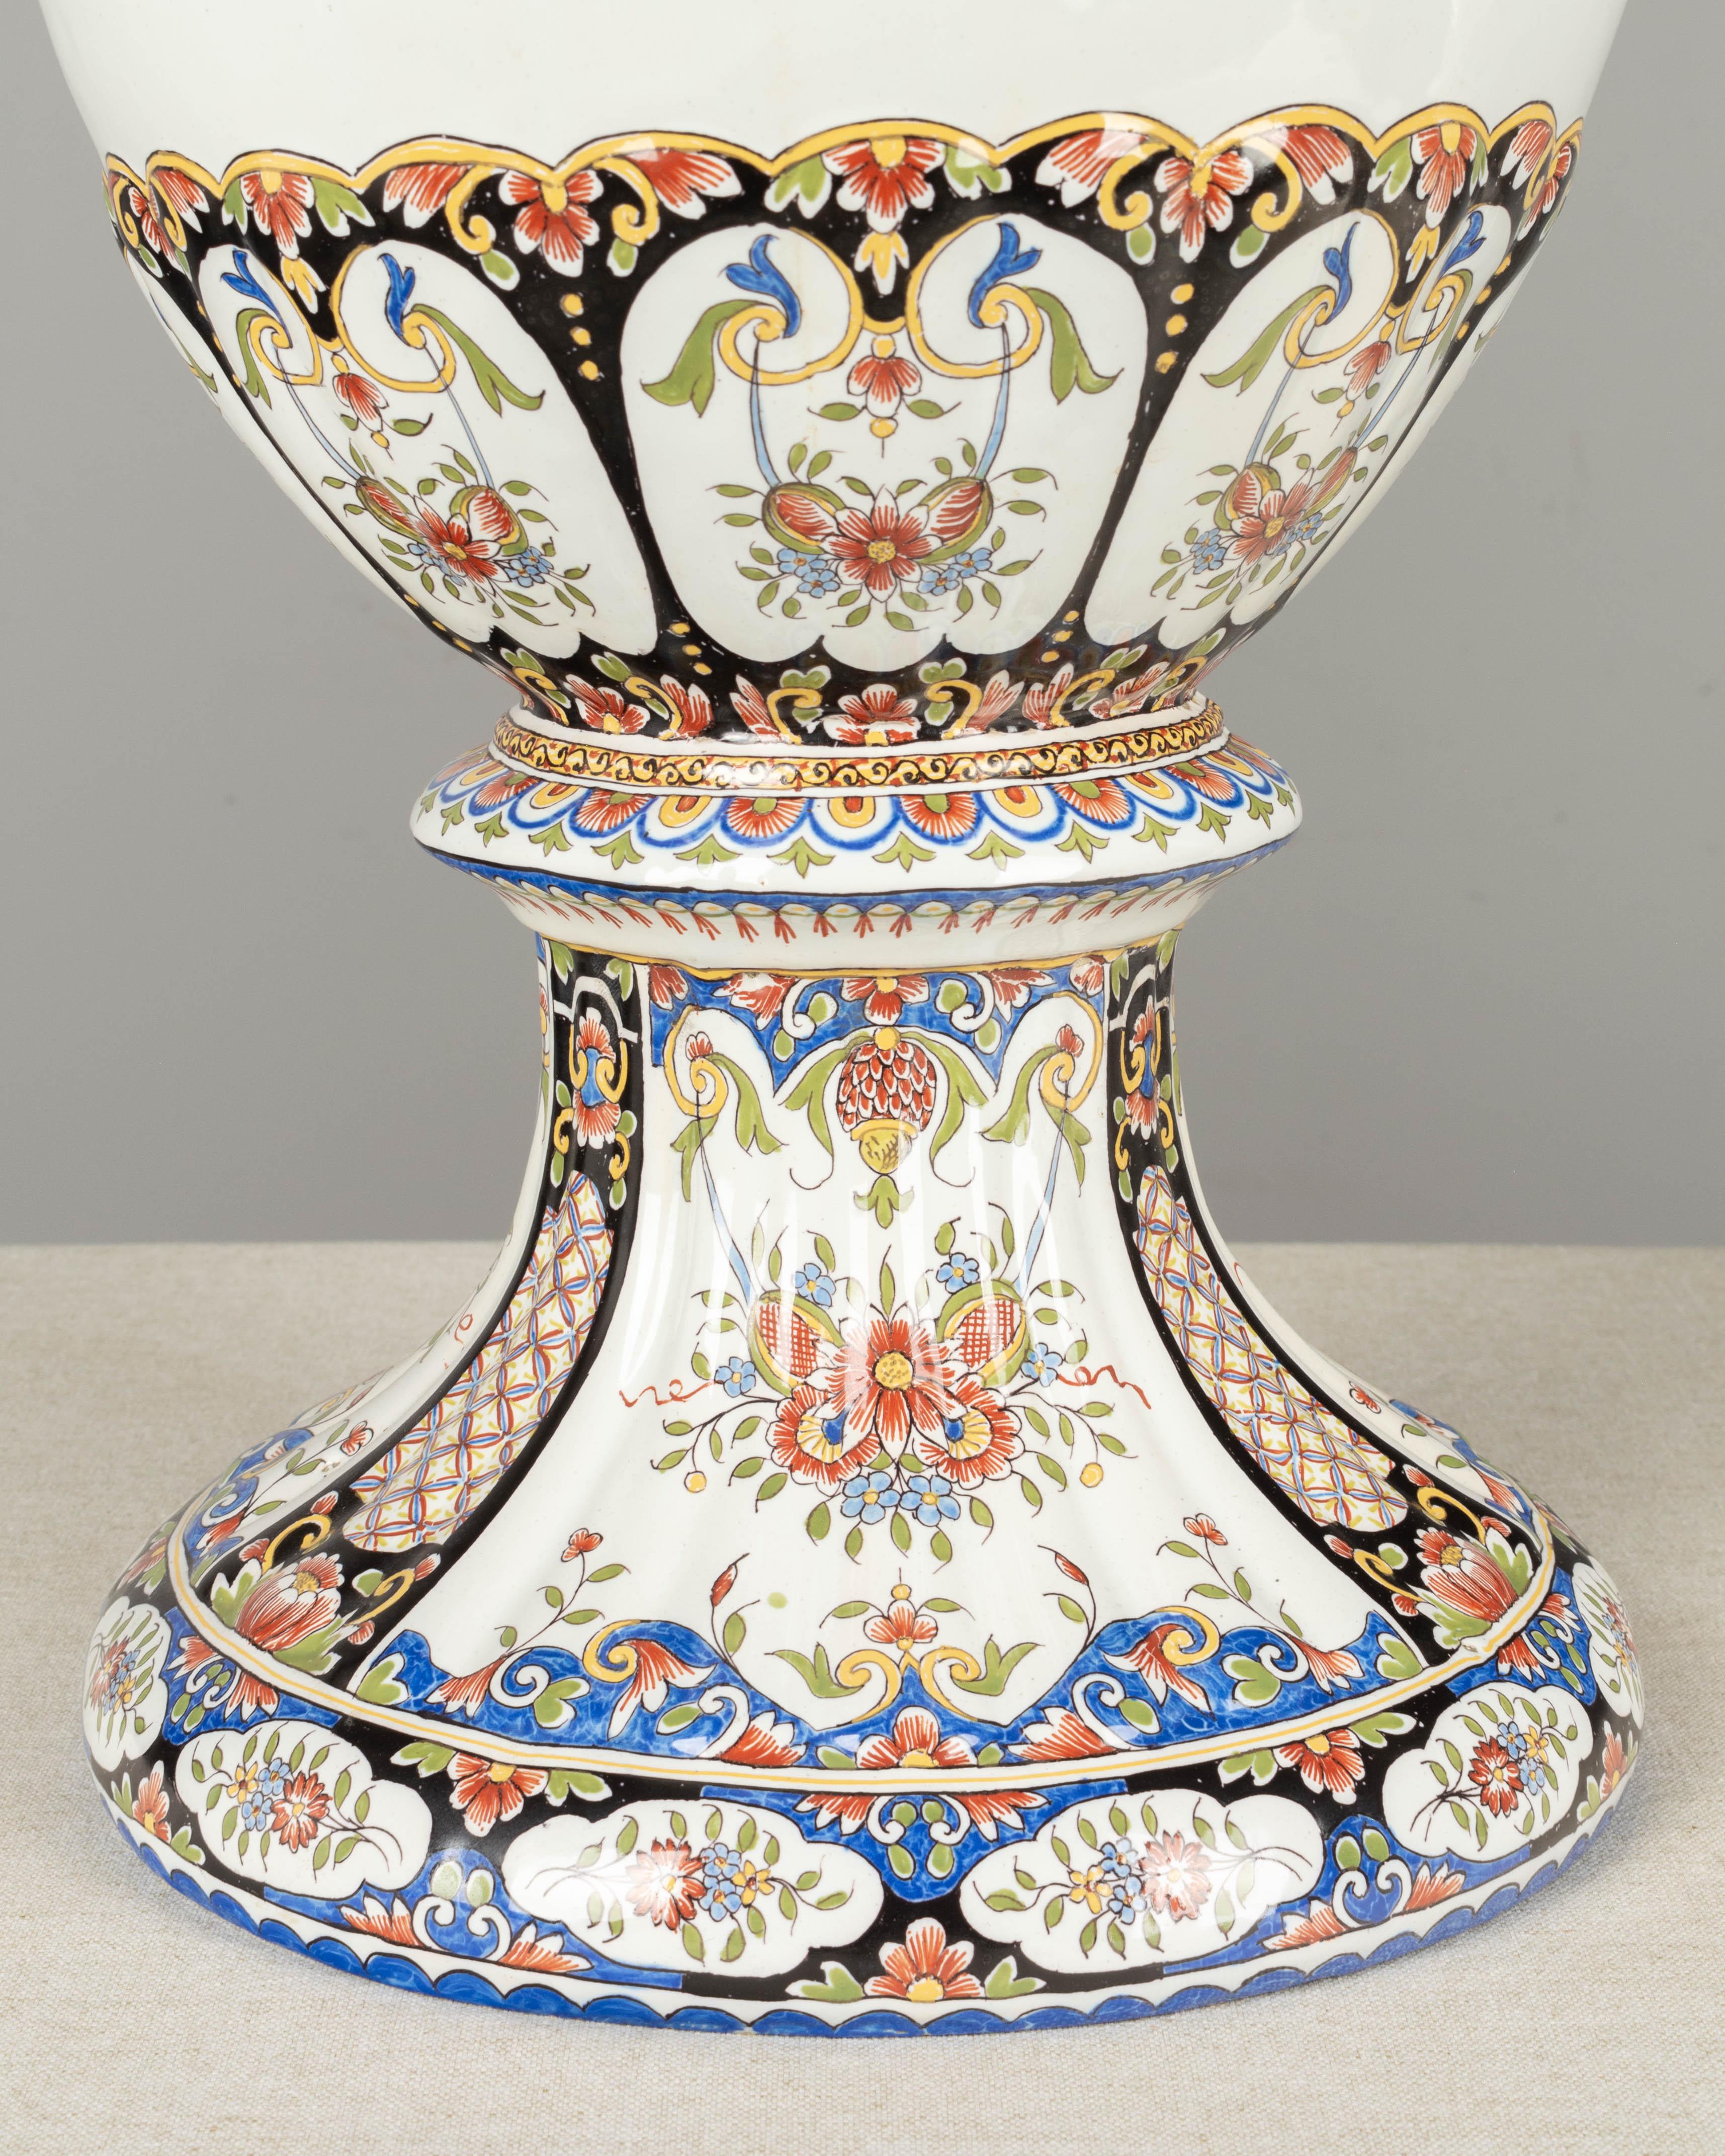 19th Century French Desvres Faience Urns, a Pair For Sale 5